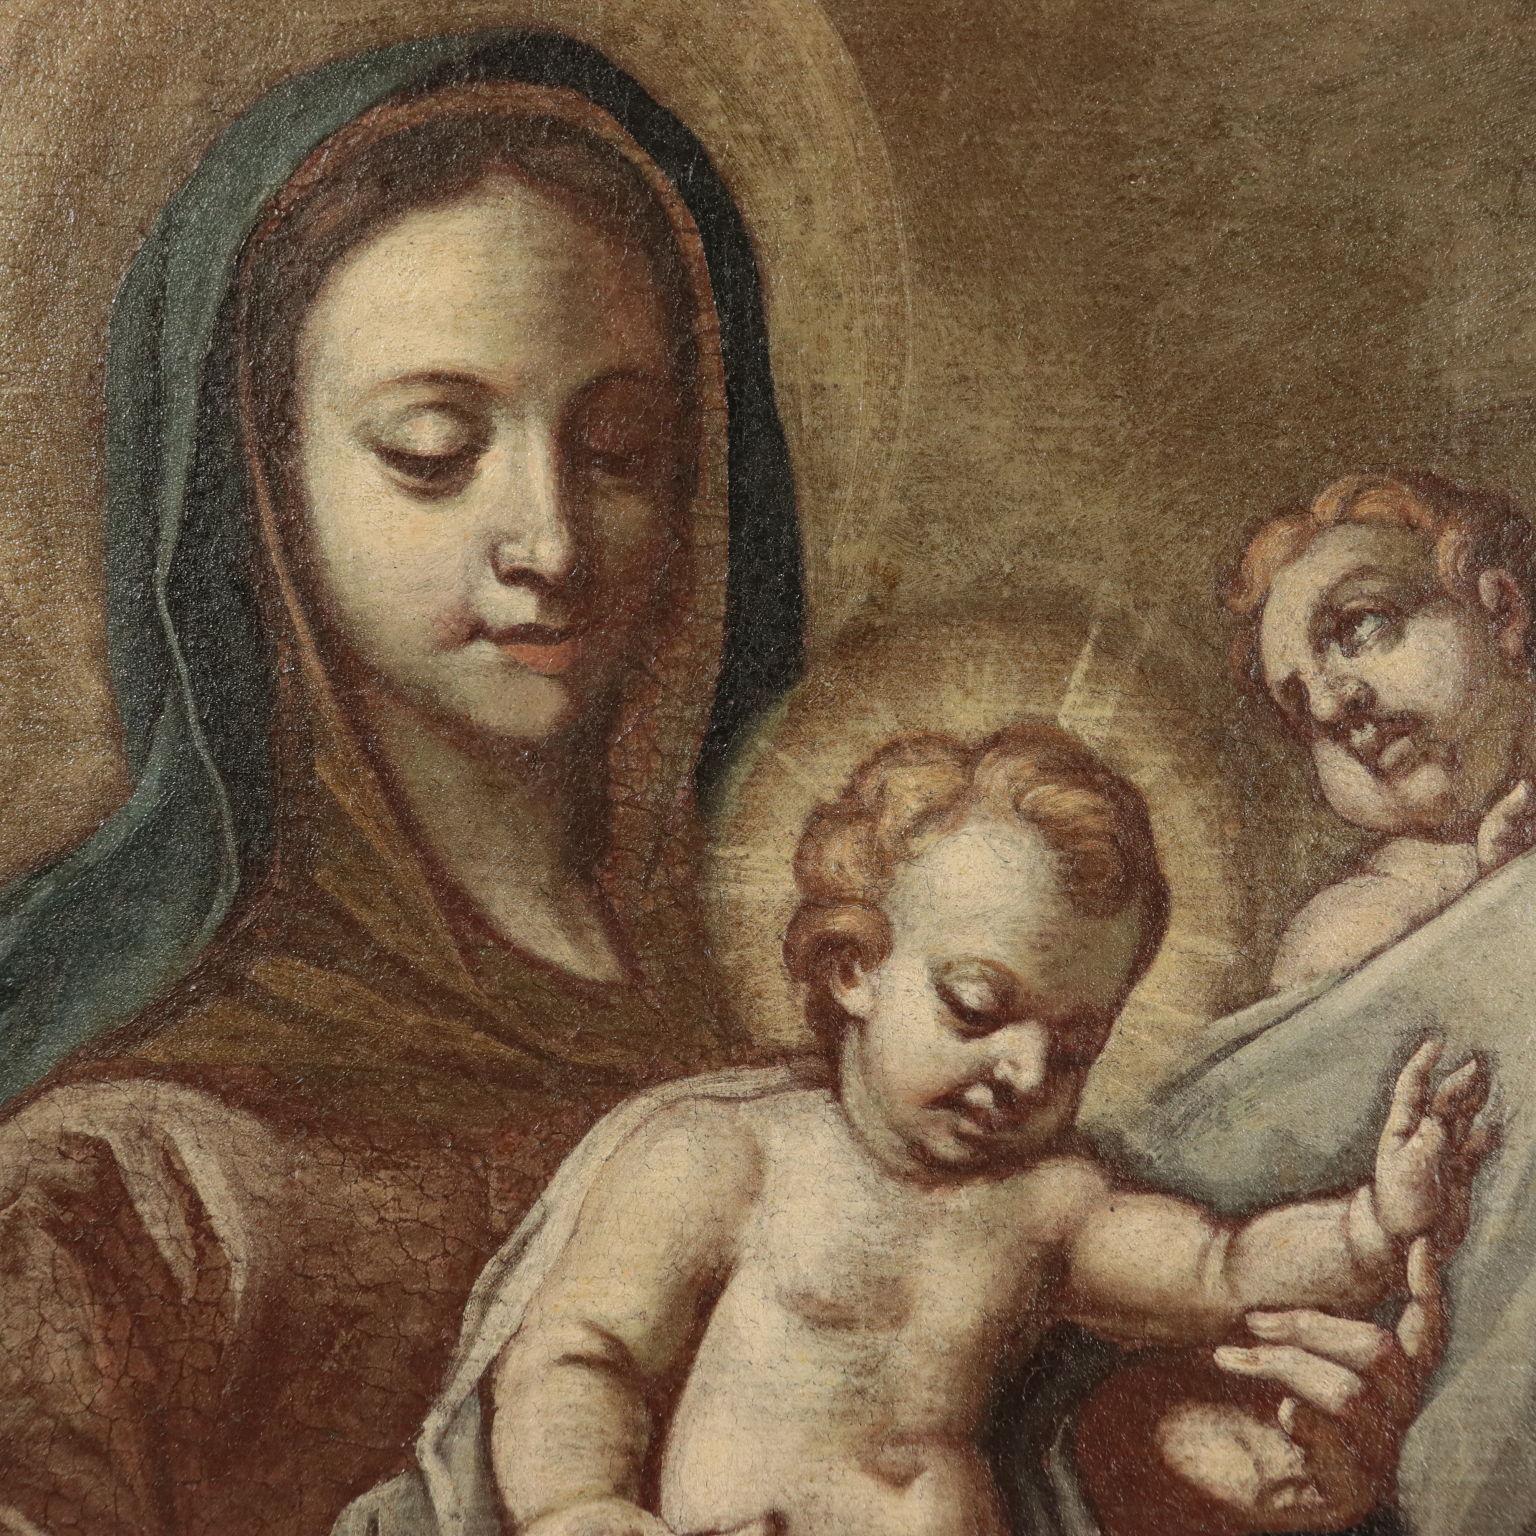 Virgin Mary with Baby Jesus on Throne between two Saints, 17th Century - Brown Figurative Painting by Unknown